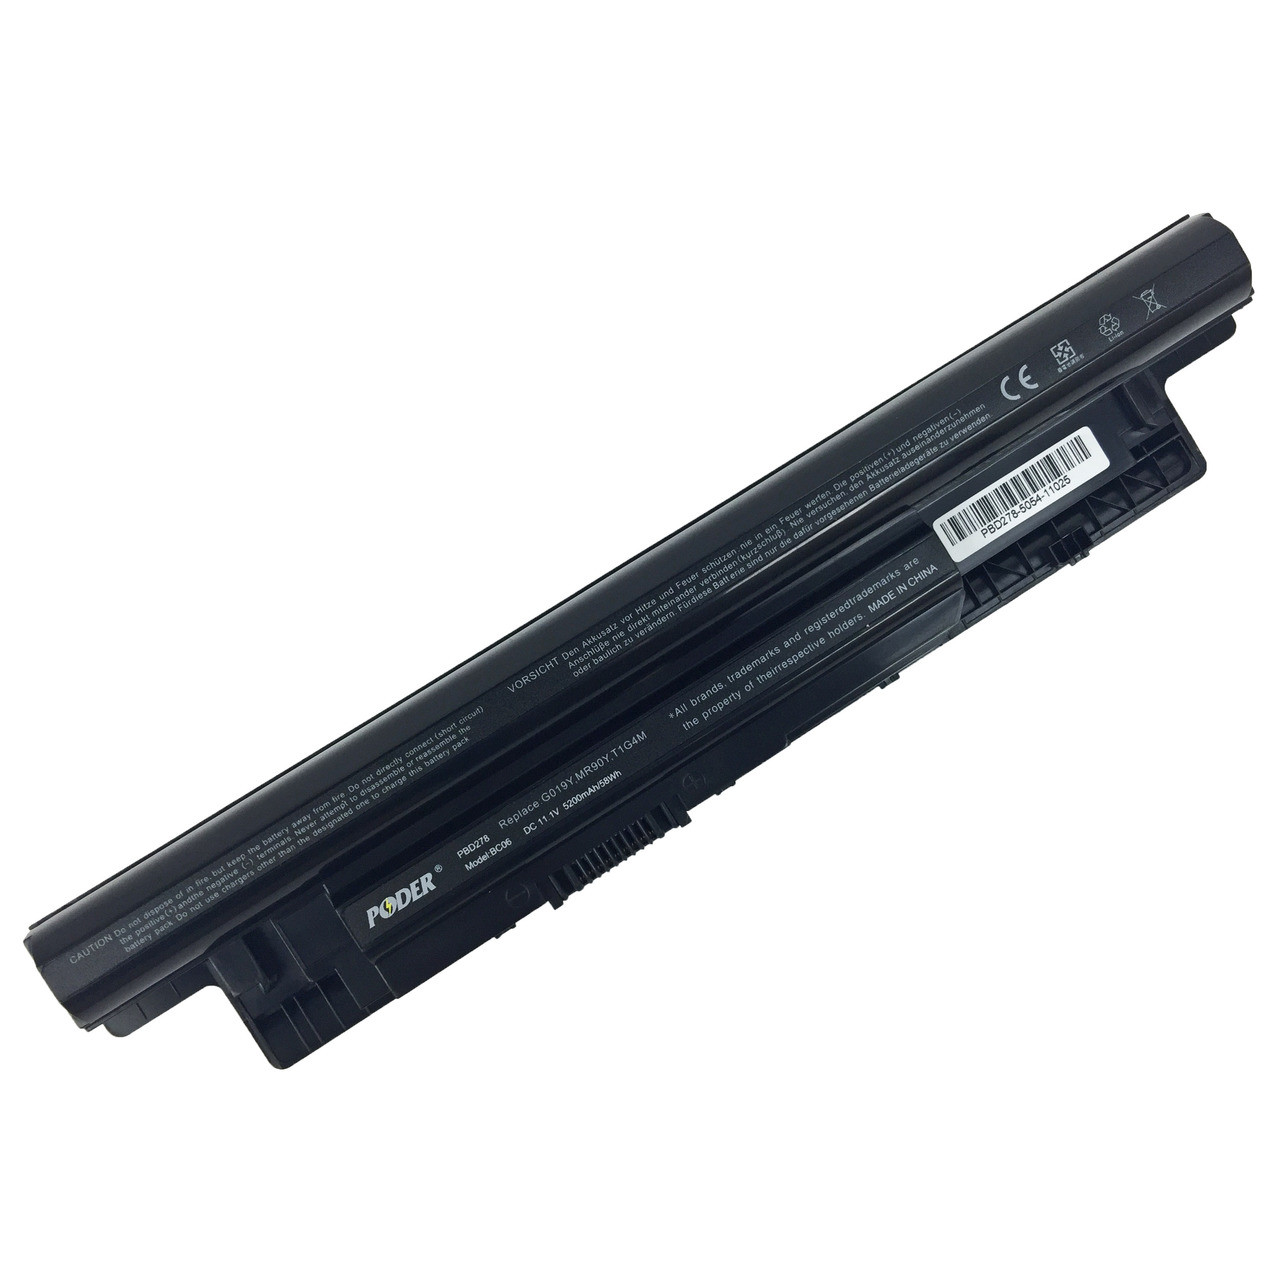 Poder® 6 Cell Battery for Dell Latitude 14, 15 3000 & Inspiron 14, 15, 17  3000